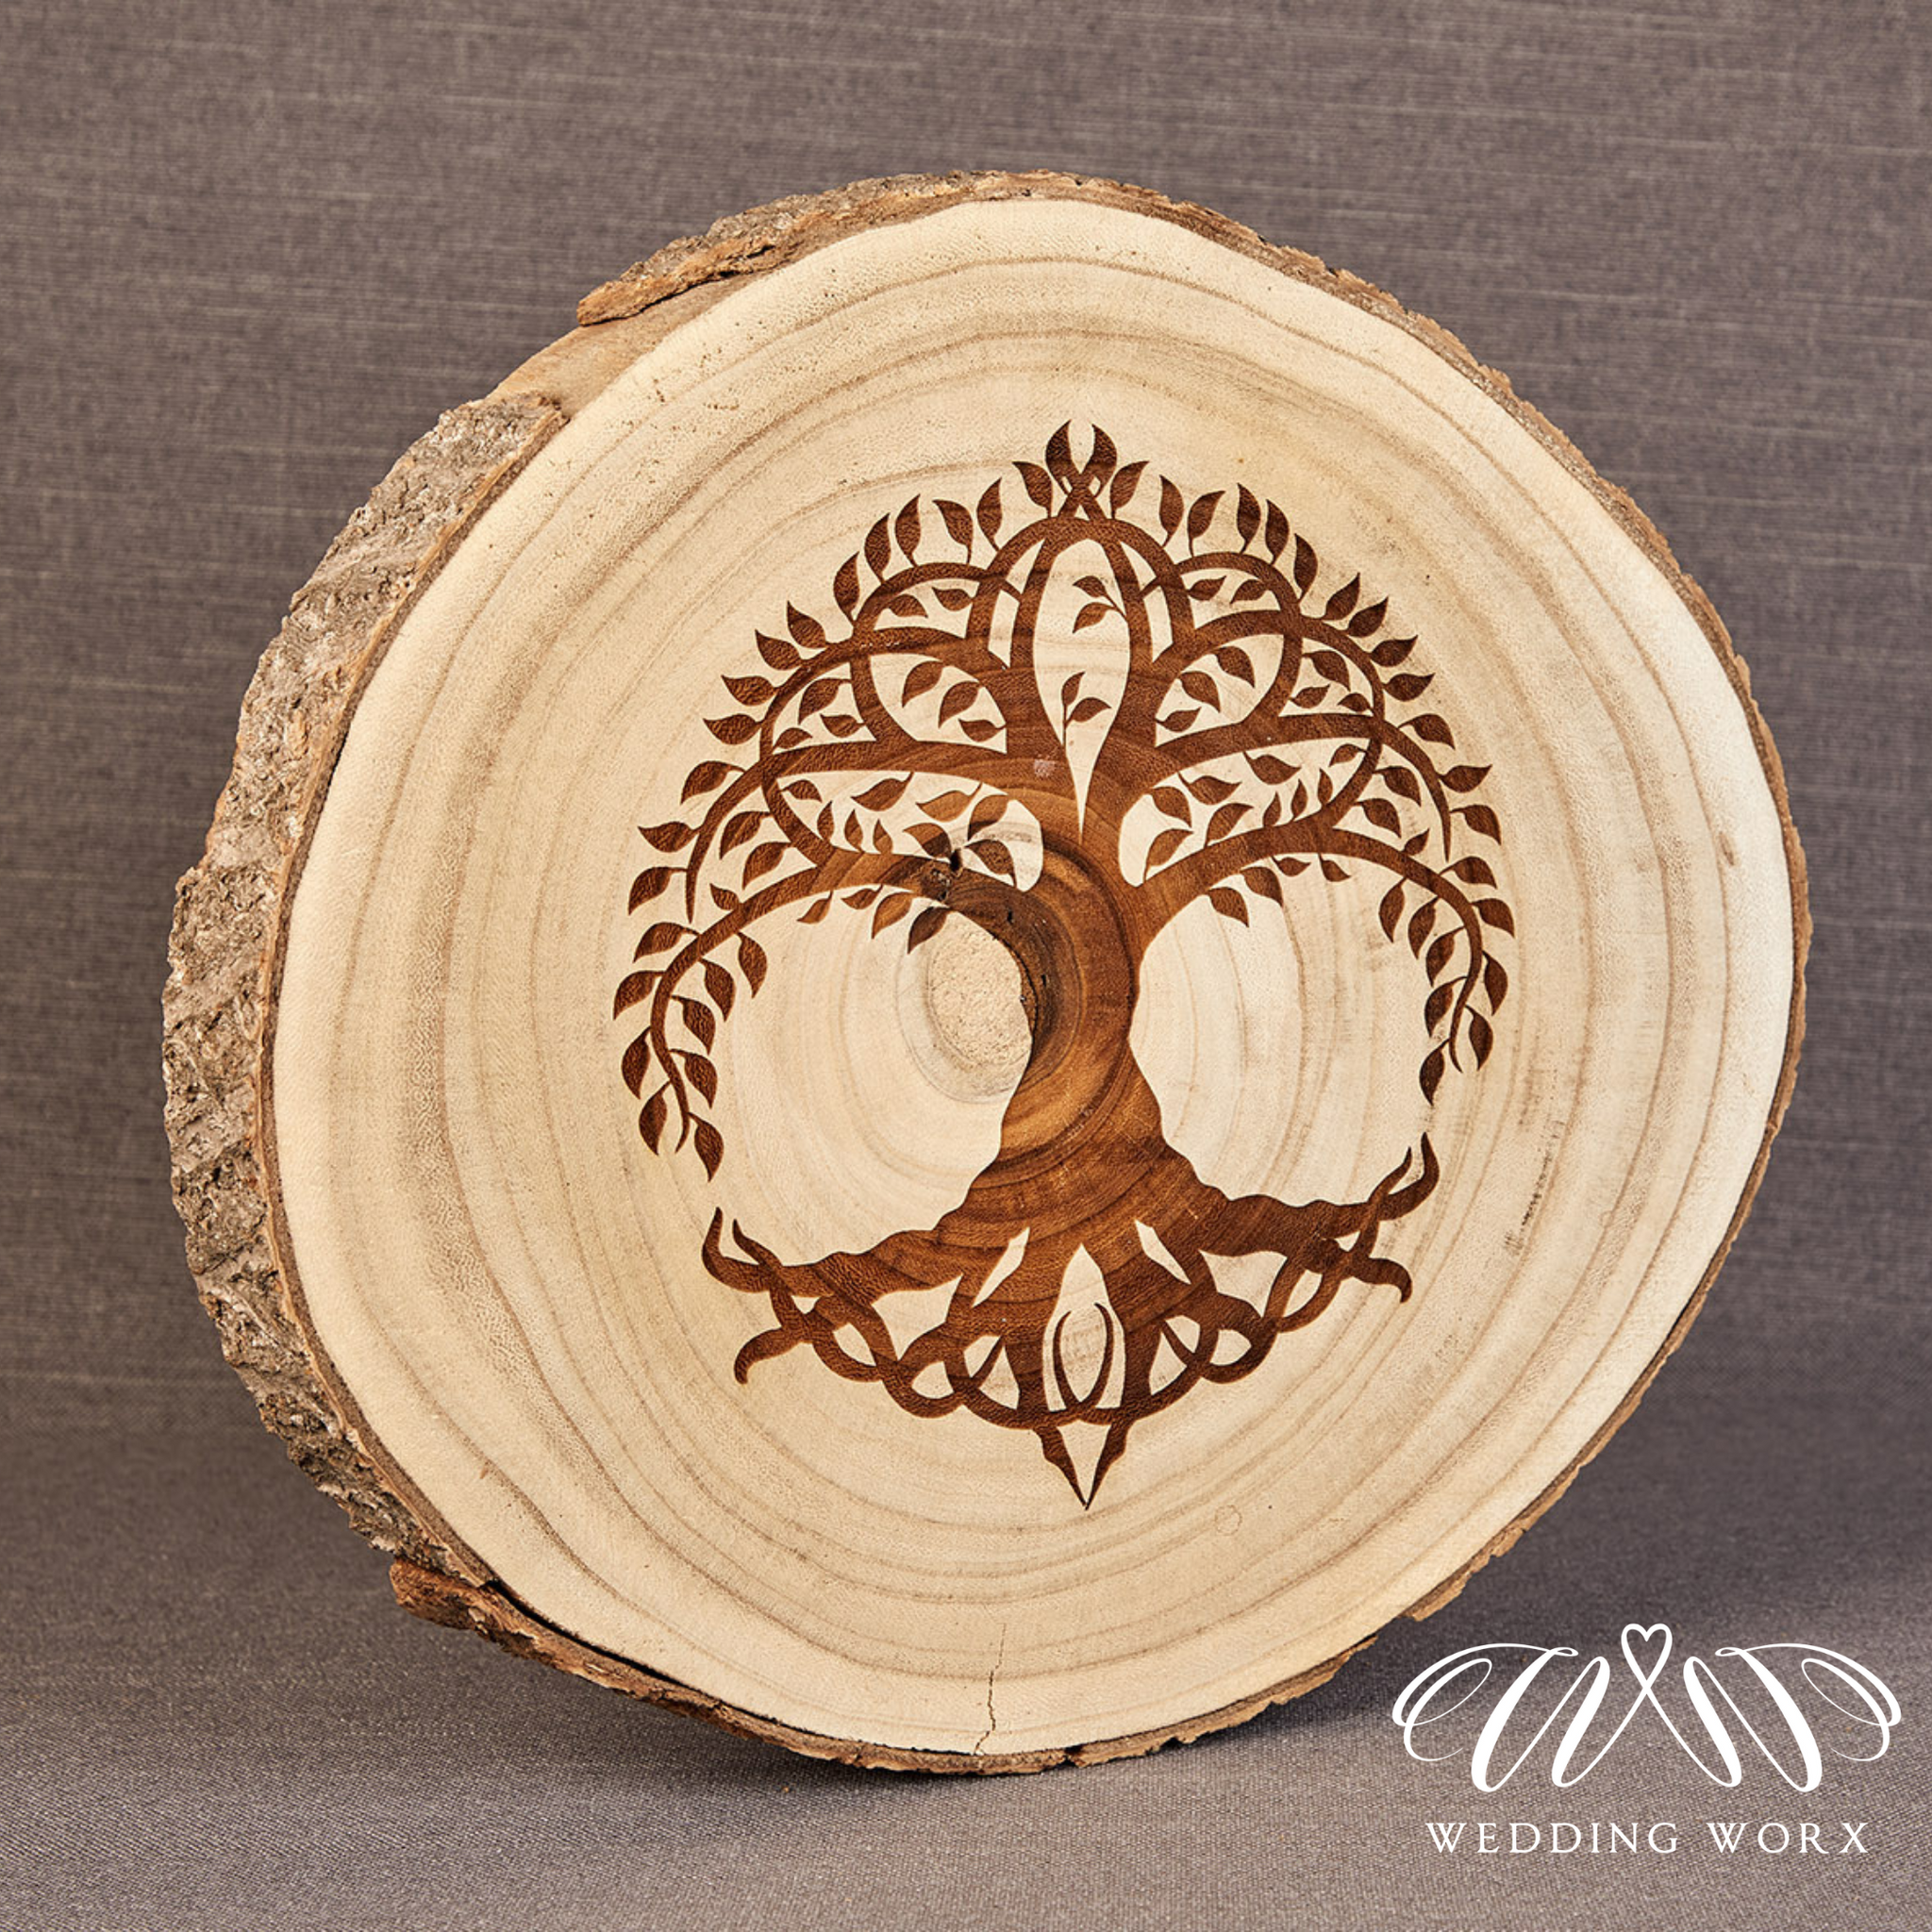 Laser engraved rustic wood slice with Tree of life design